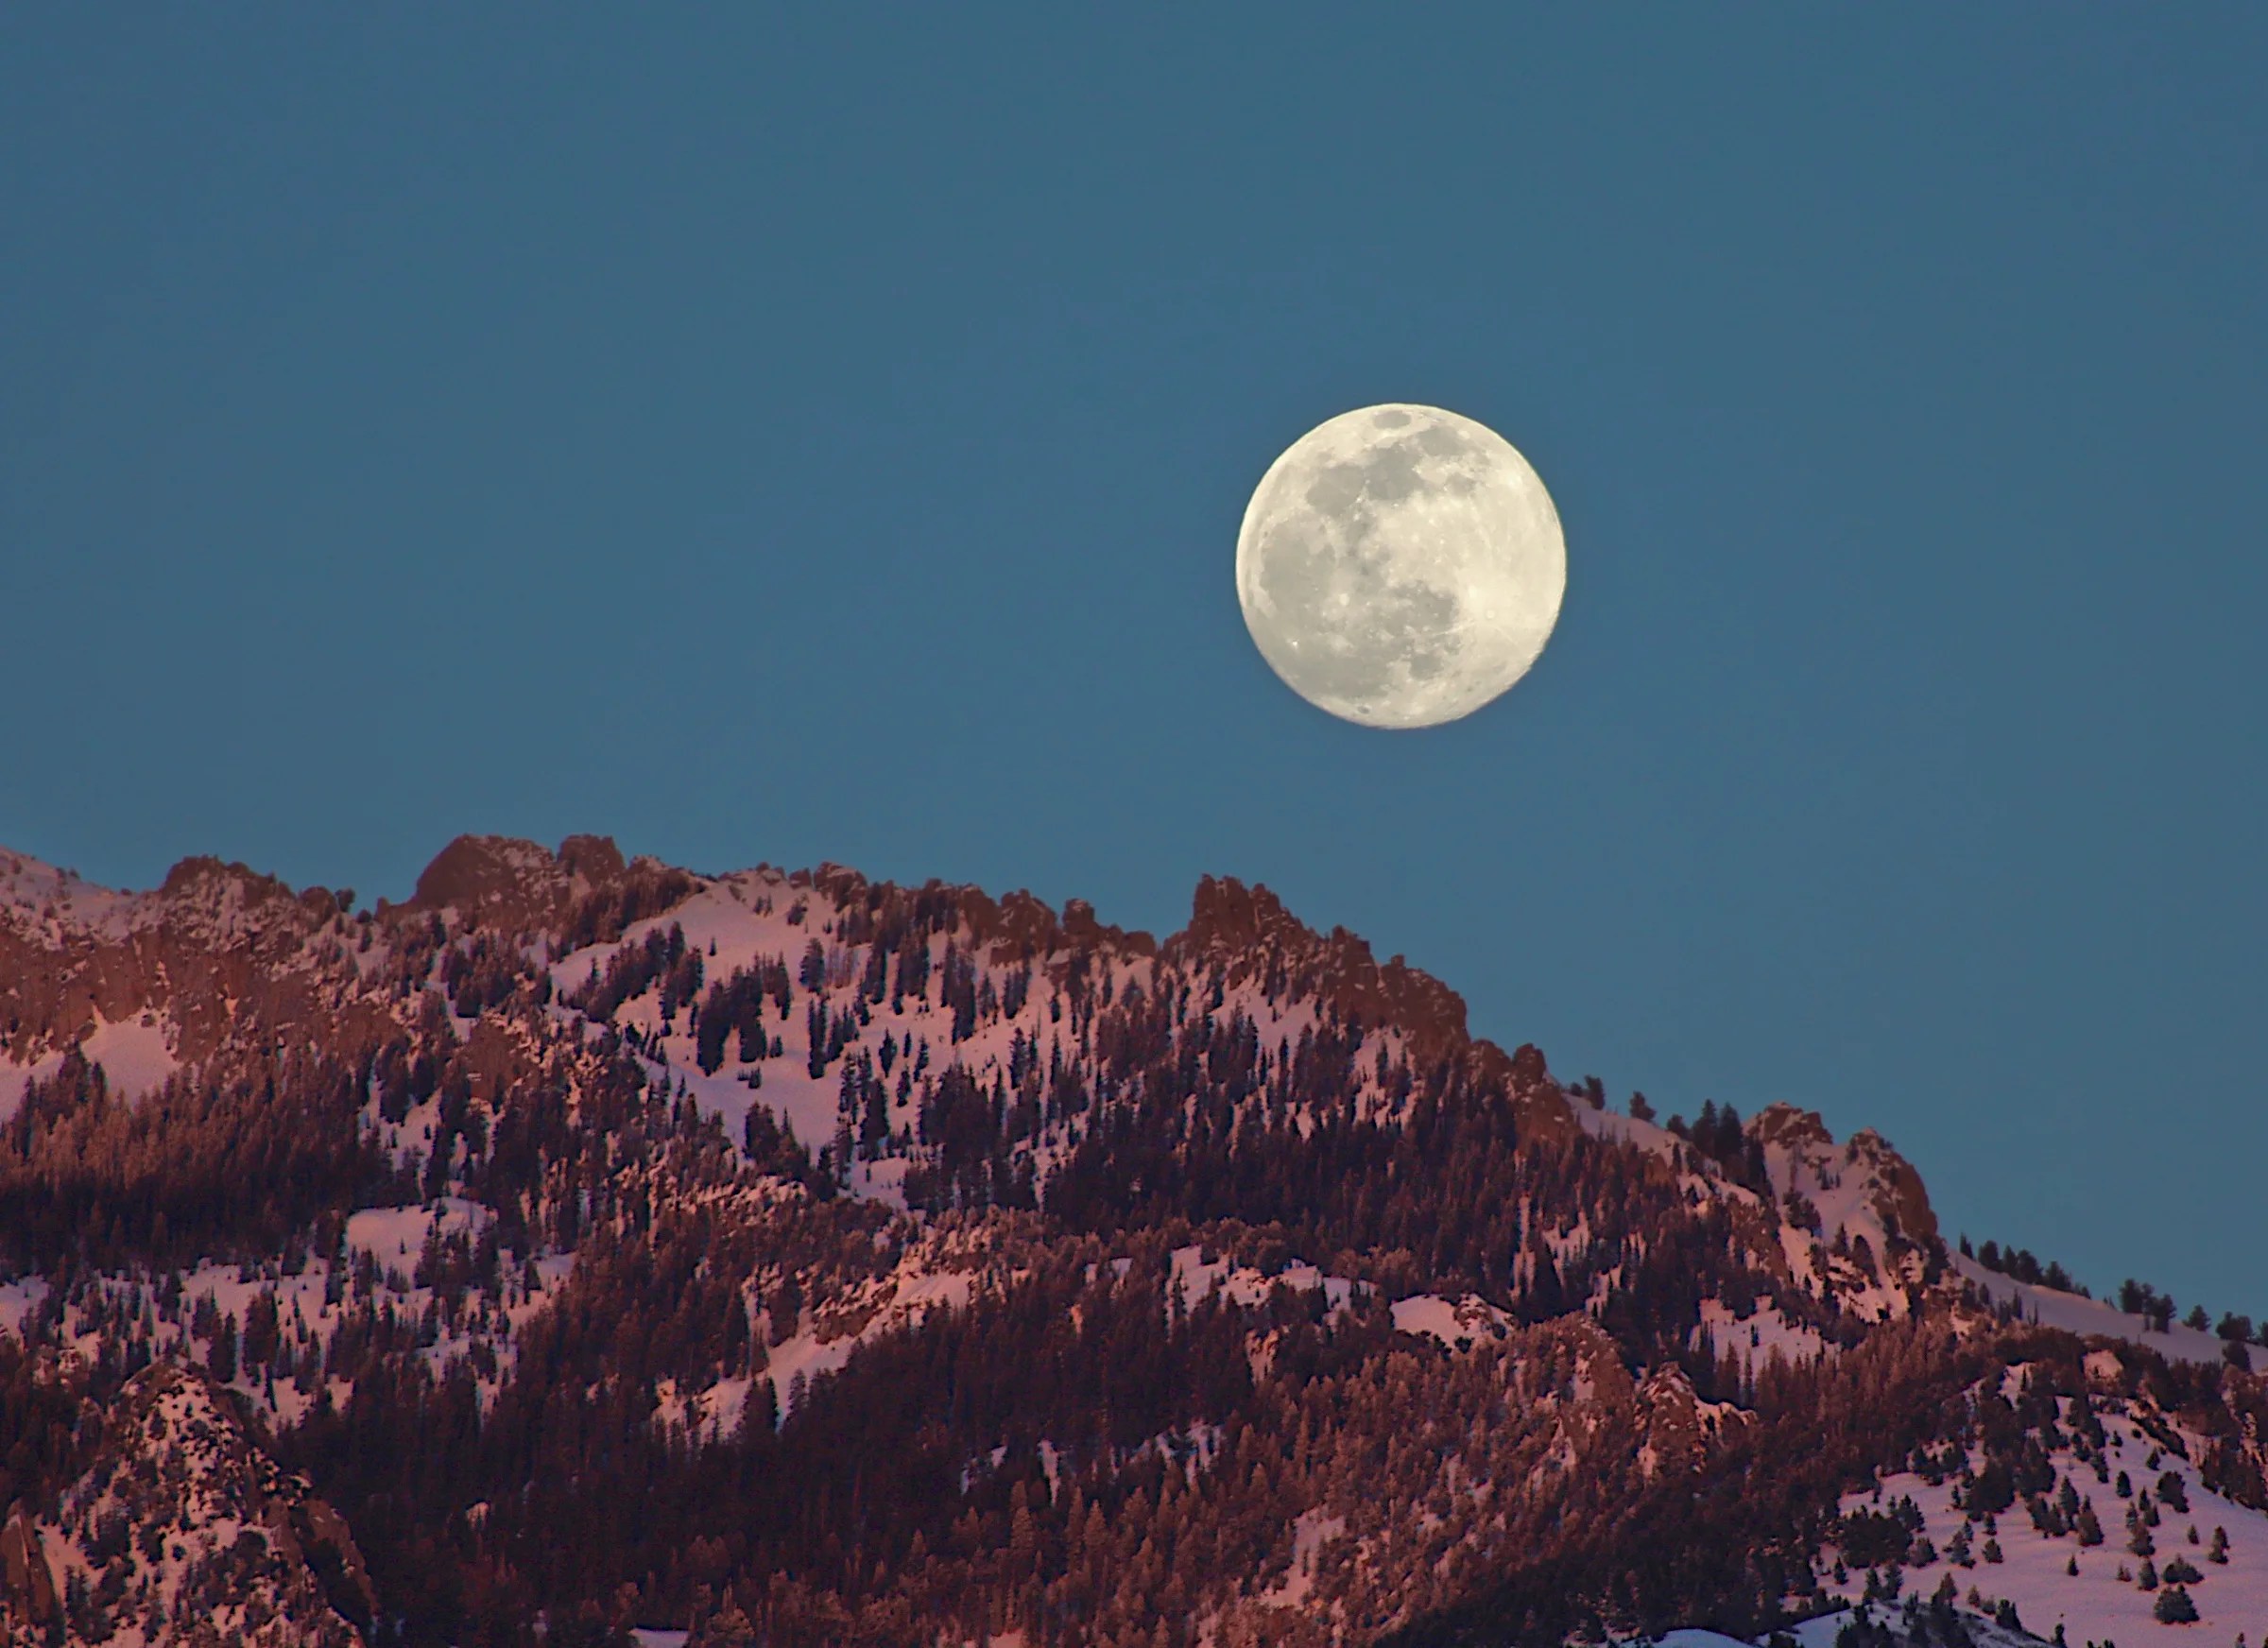 In a dark blue, evening sky, a bright, round full moon appears above a rugged, snow-covered mountain. Pink light from sunset colors the mountainside.